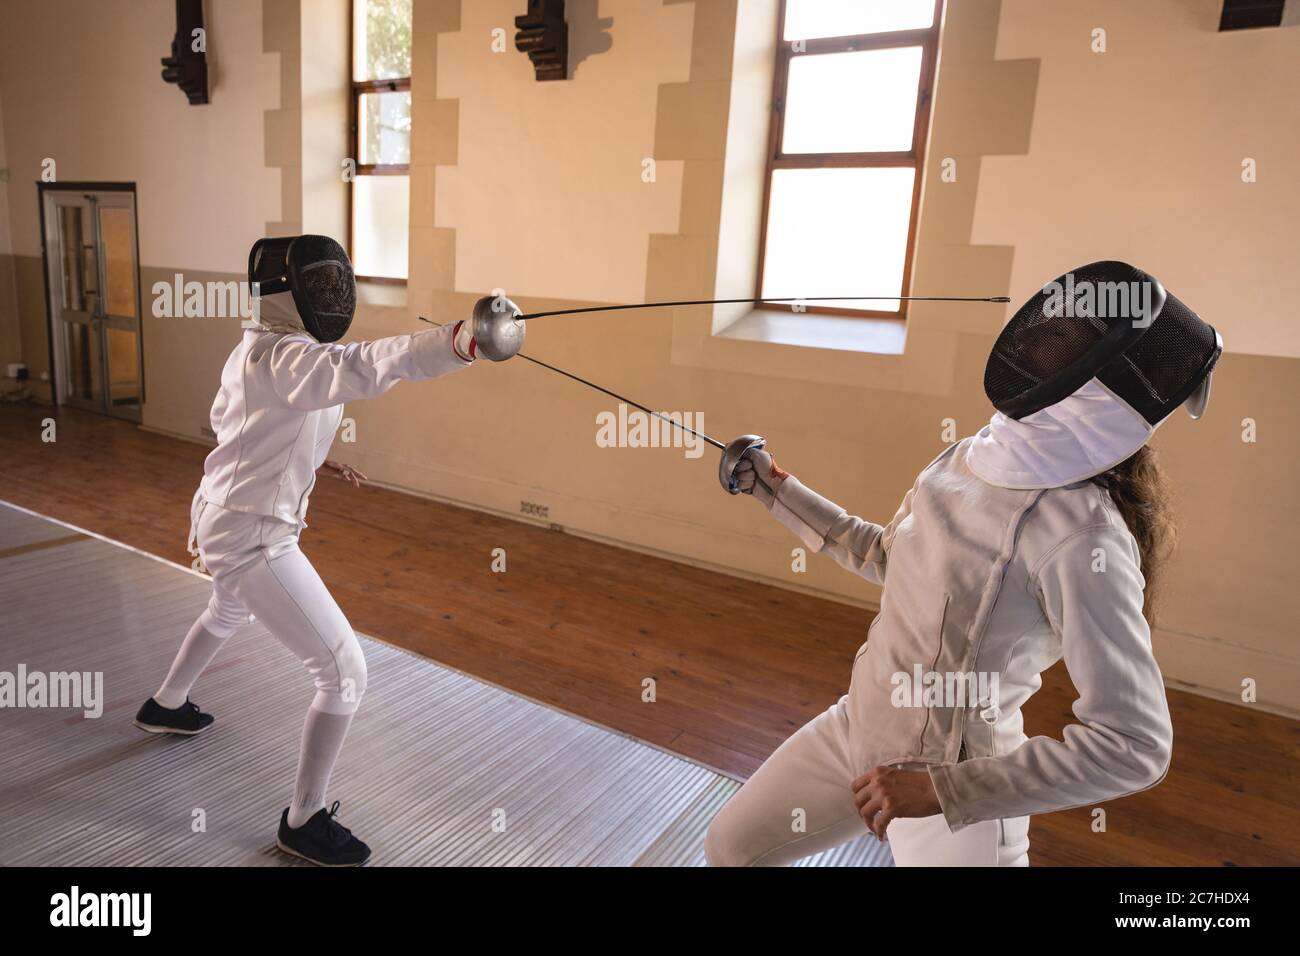 Two female fencers practicing fencing Stock Photo